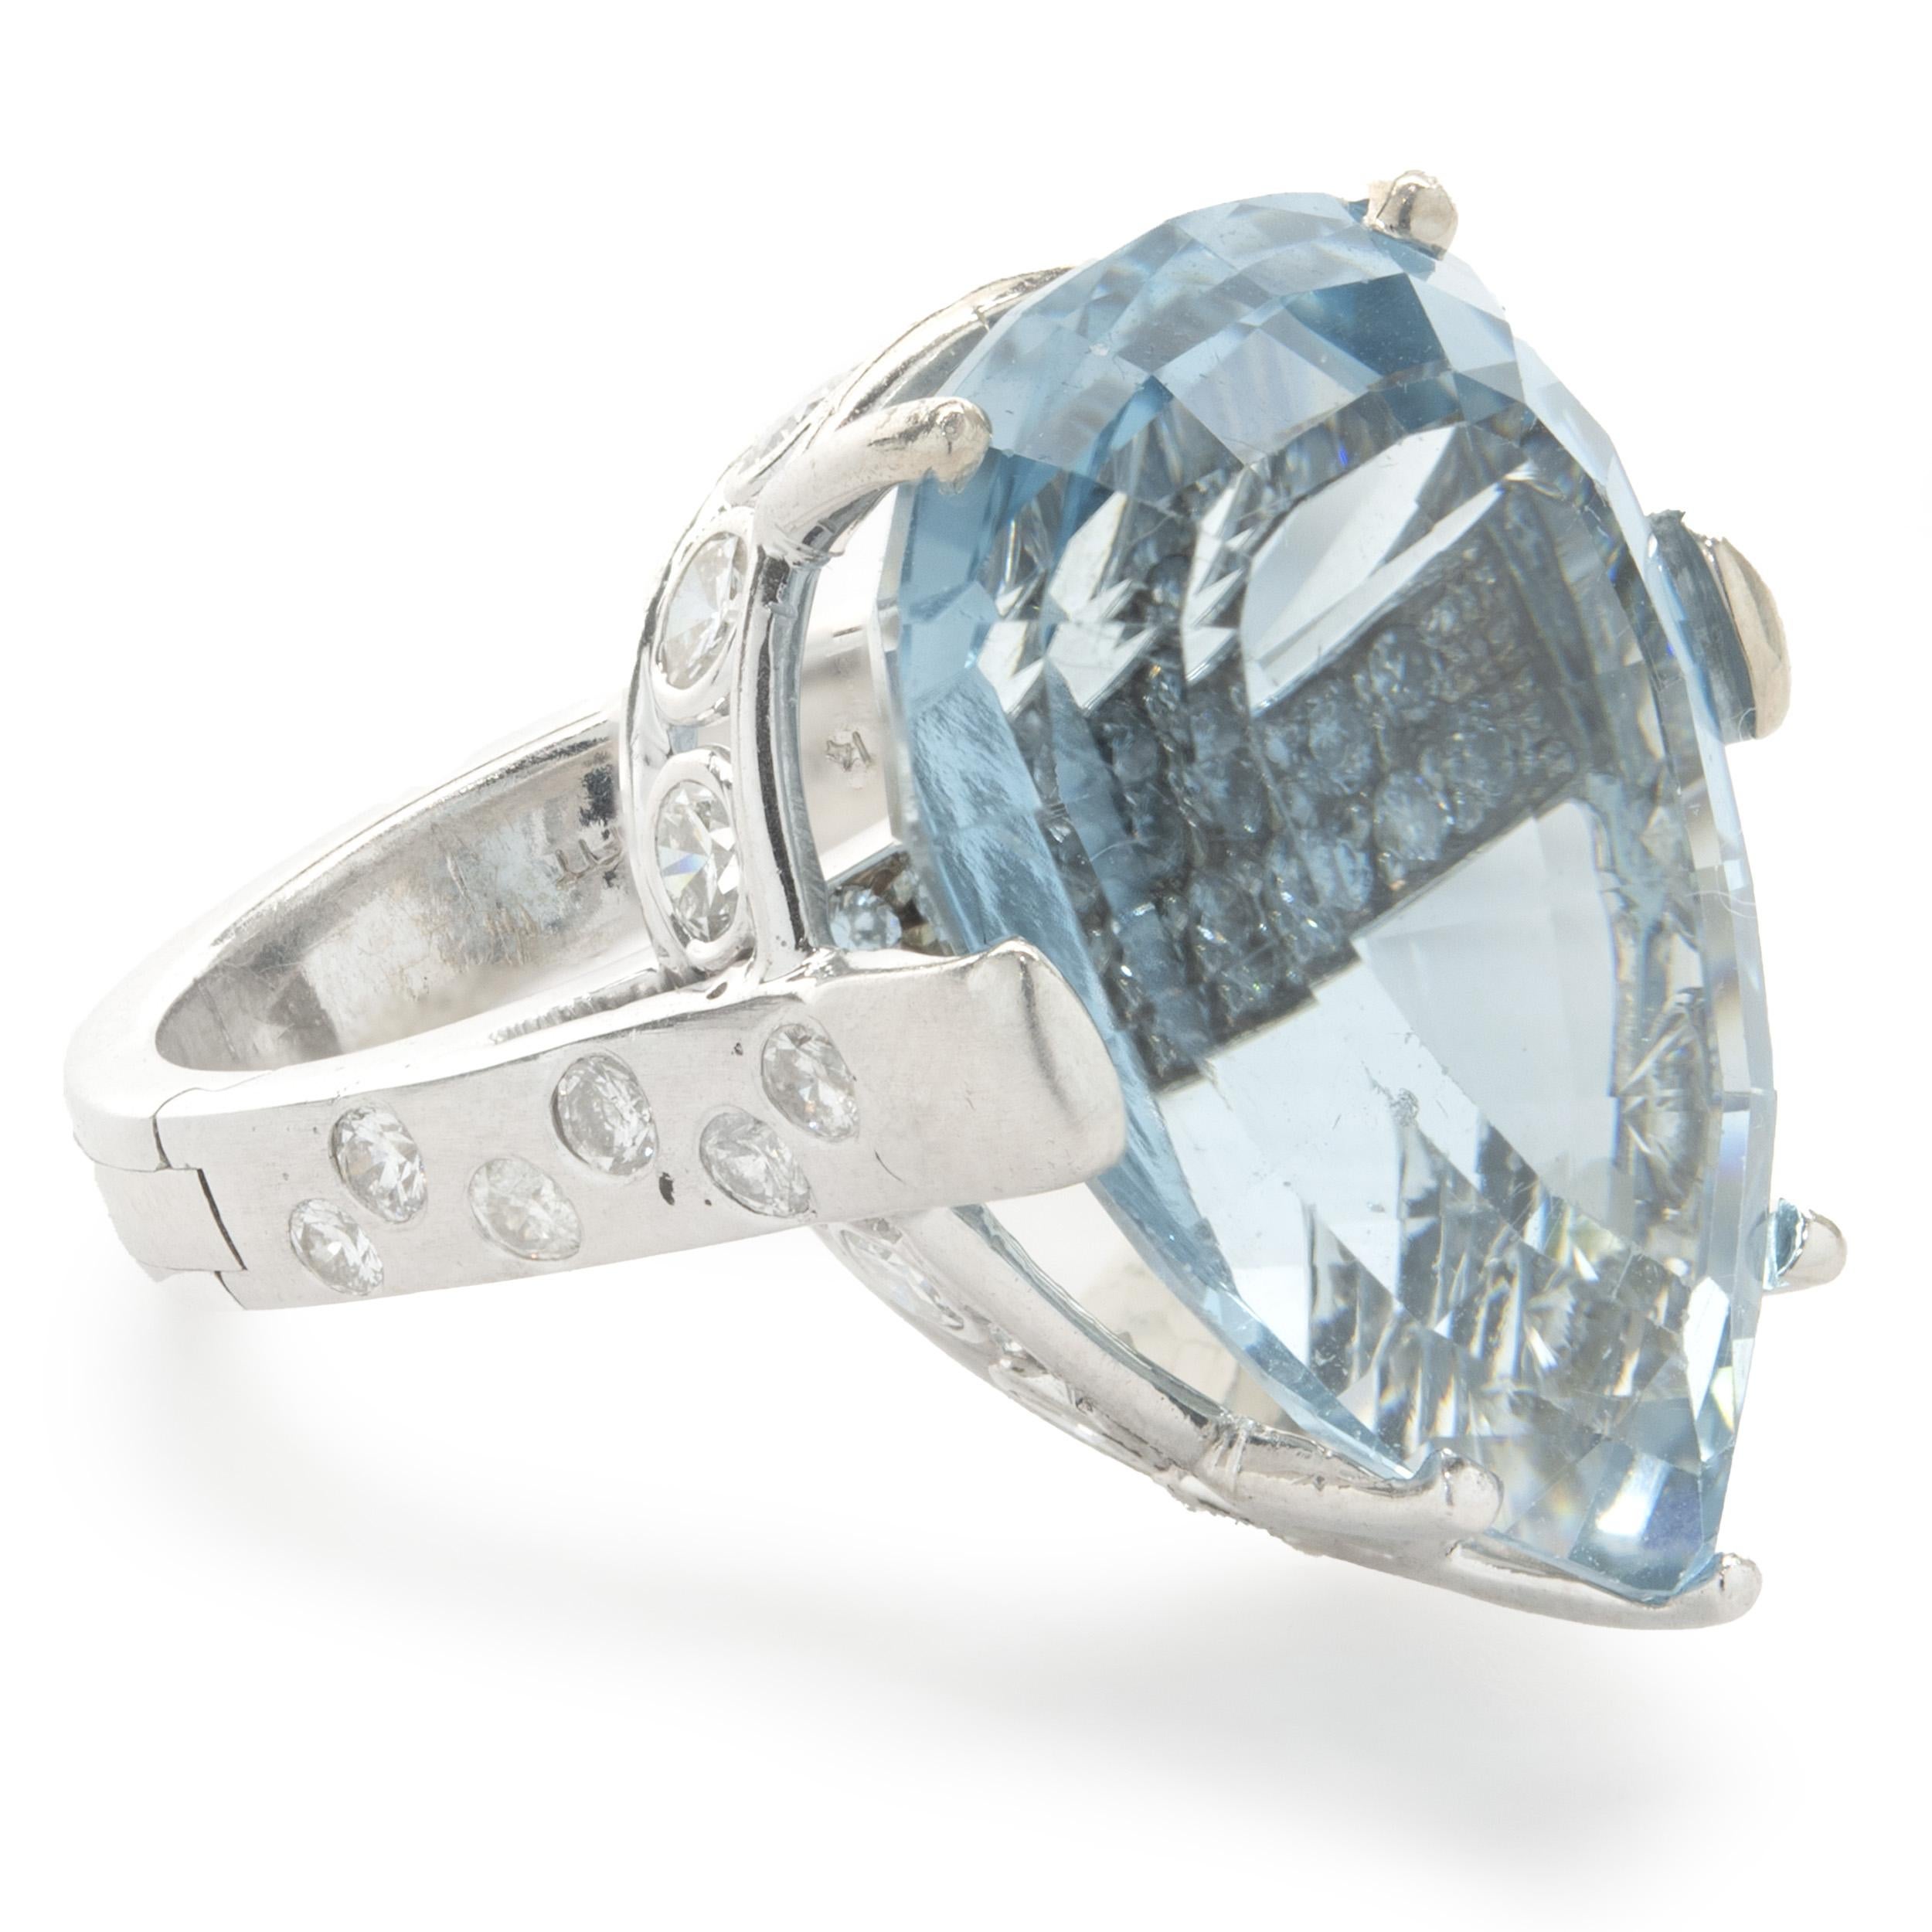 Designer: custom
Material: 14K white gold
Diamond: 26 round brilliant cut = 1.44cttw
Color: G
Clarity: VS2
Aquamarine: 1 pear cut = 15.50cttw
Ring Size: 5.5 (please allow up to 2 additional business days for sizing requests)
Dimensions: ring top